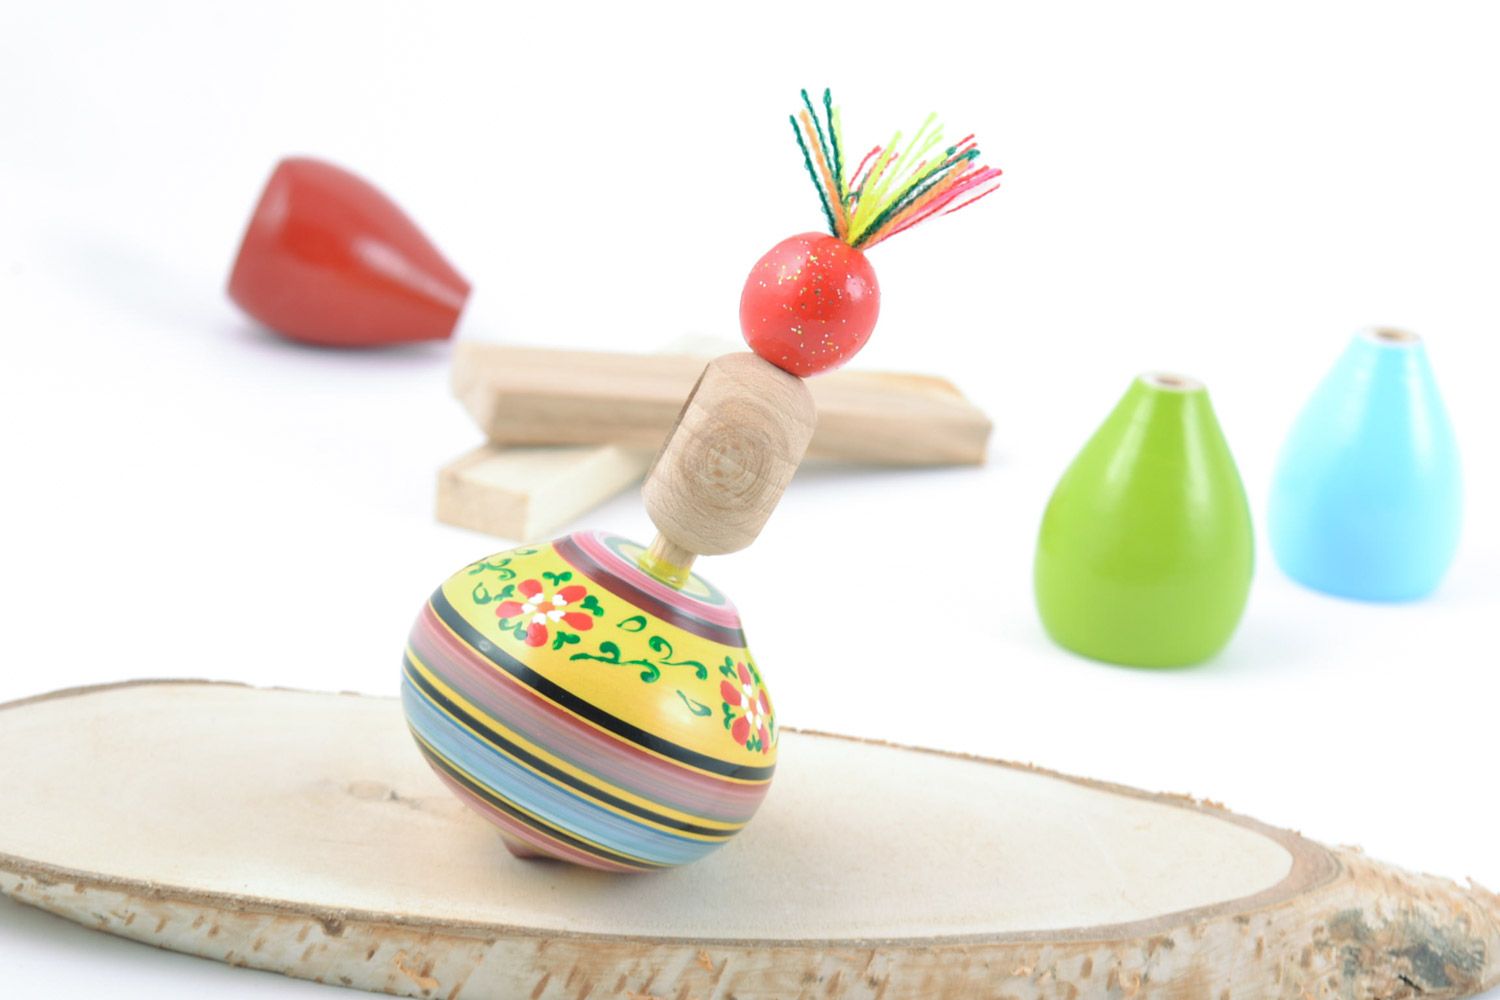 Homemade eco friendly wooden toy spinning top painted with ornaments for kids photo 1